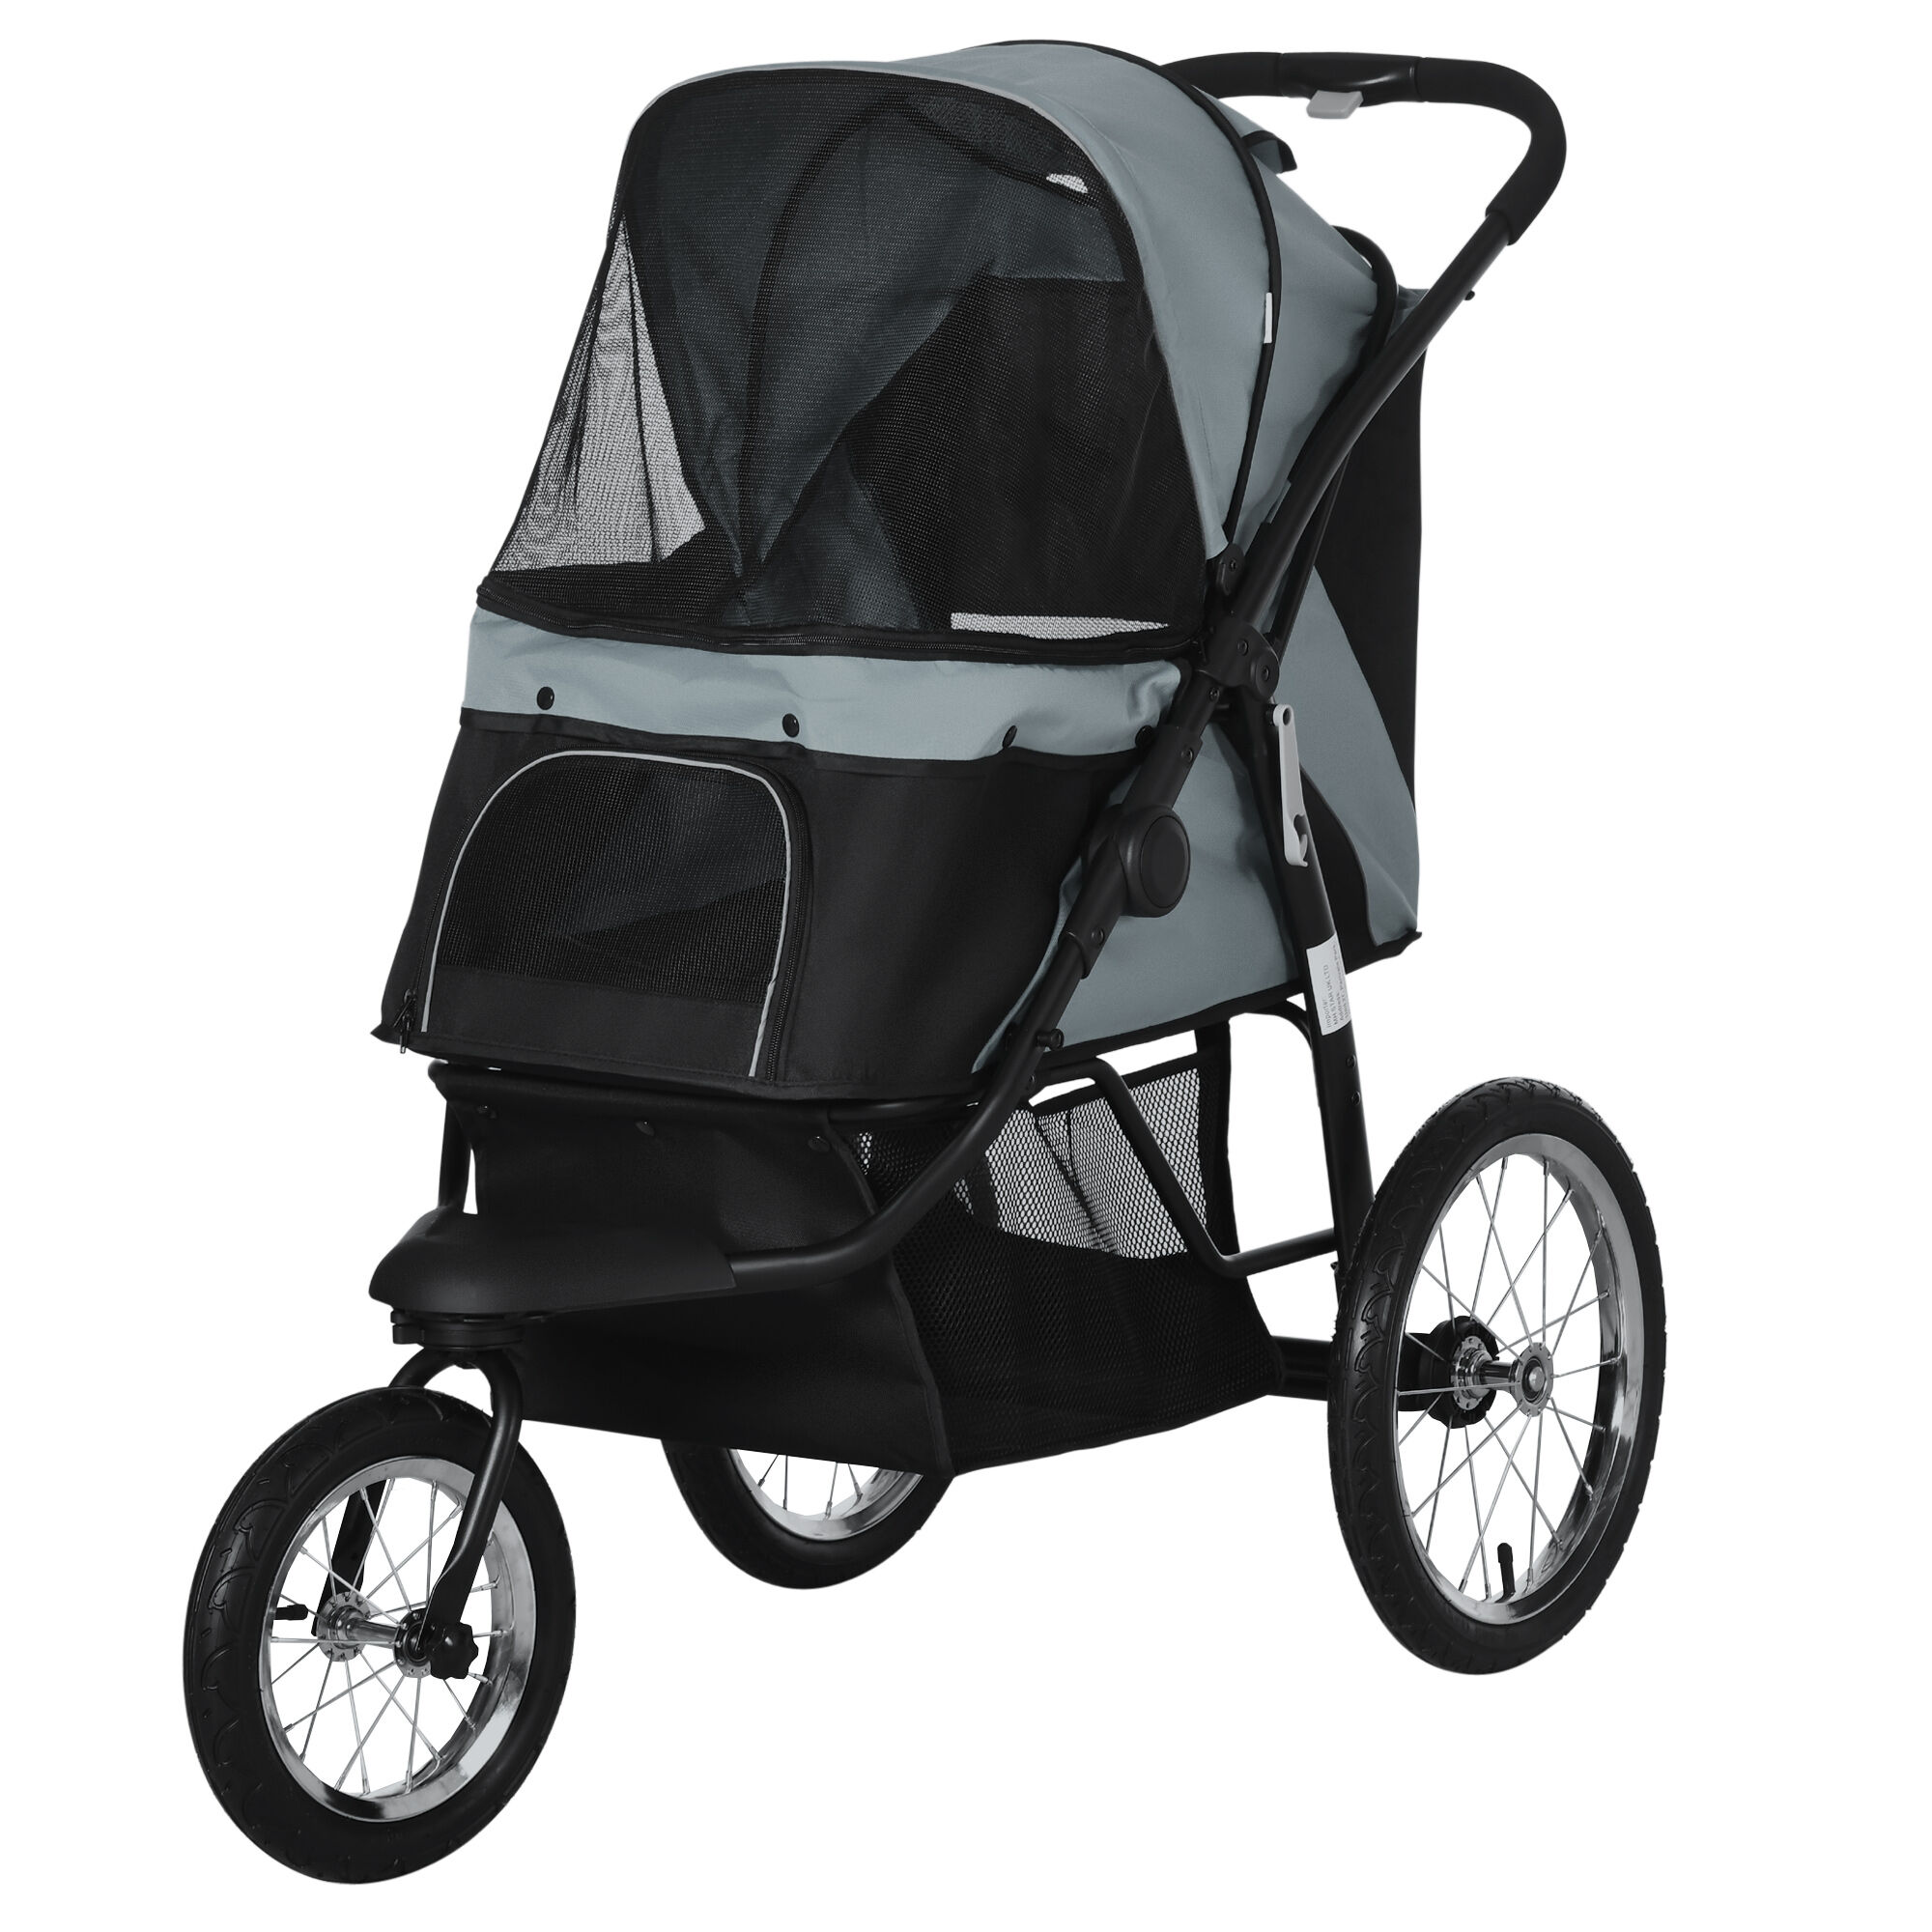 PawHut Pet Stroller for Small Dogs with Adjustable Canopy, 3 Big Wheels, Foldable Cat Stroller with Safety Tether, Storage Basket, Gray